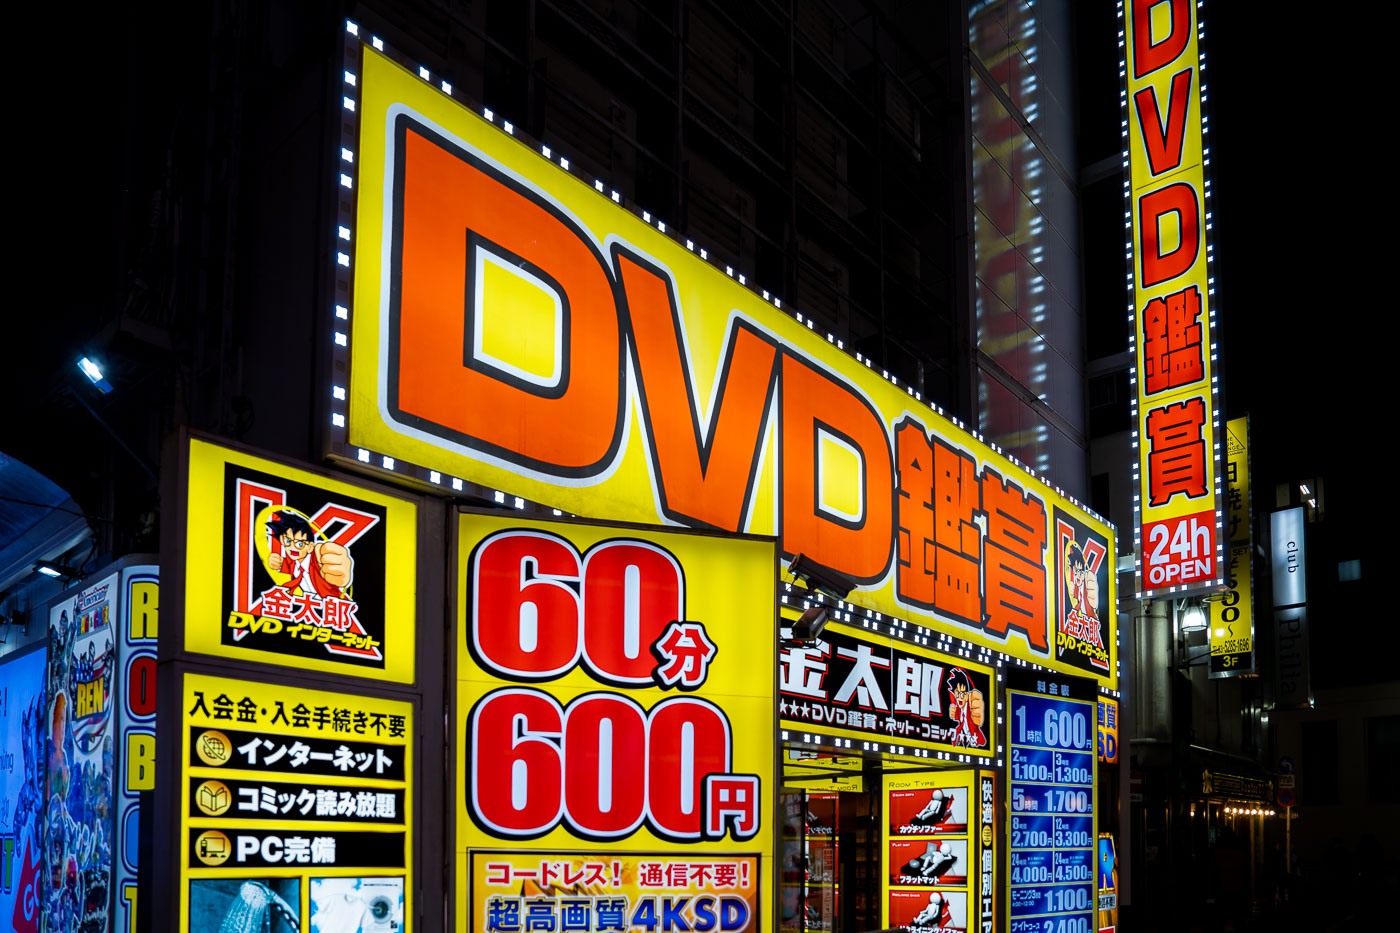 Signs for DVD sales in Tokyo Japan